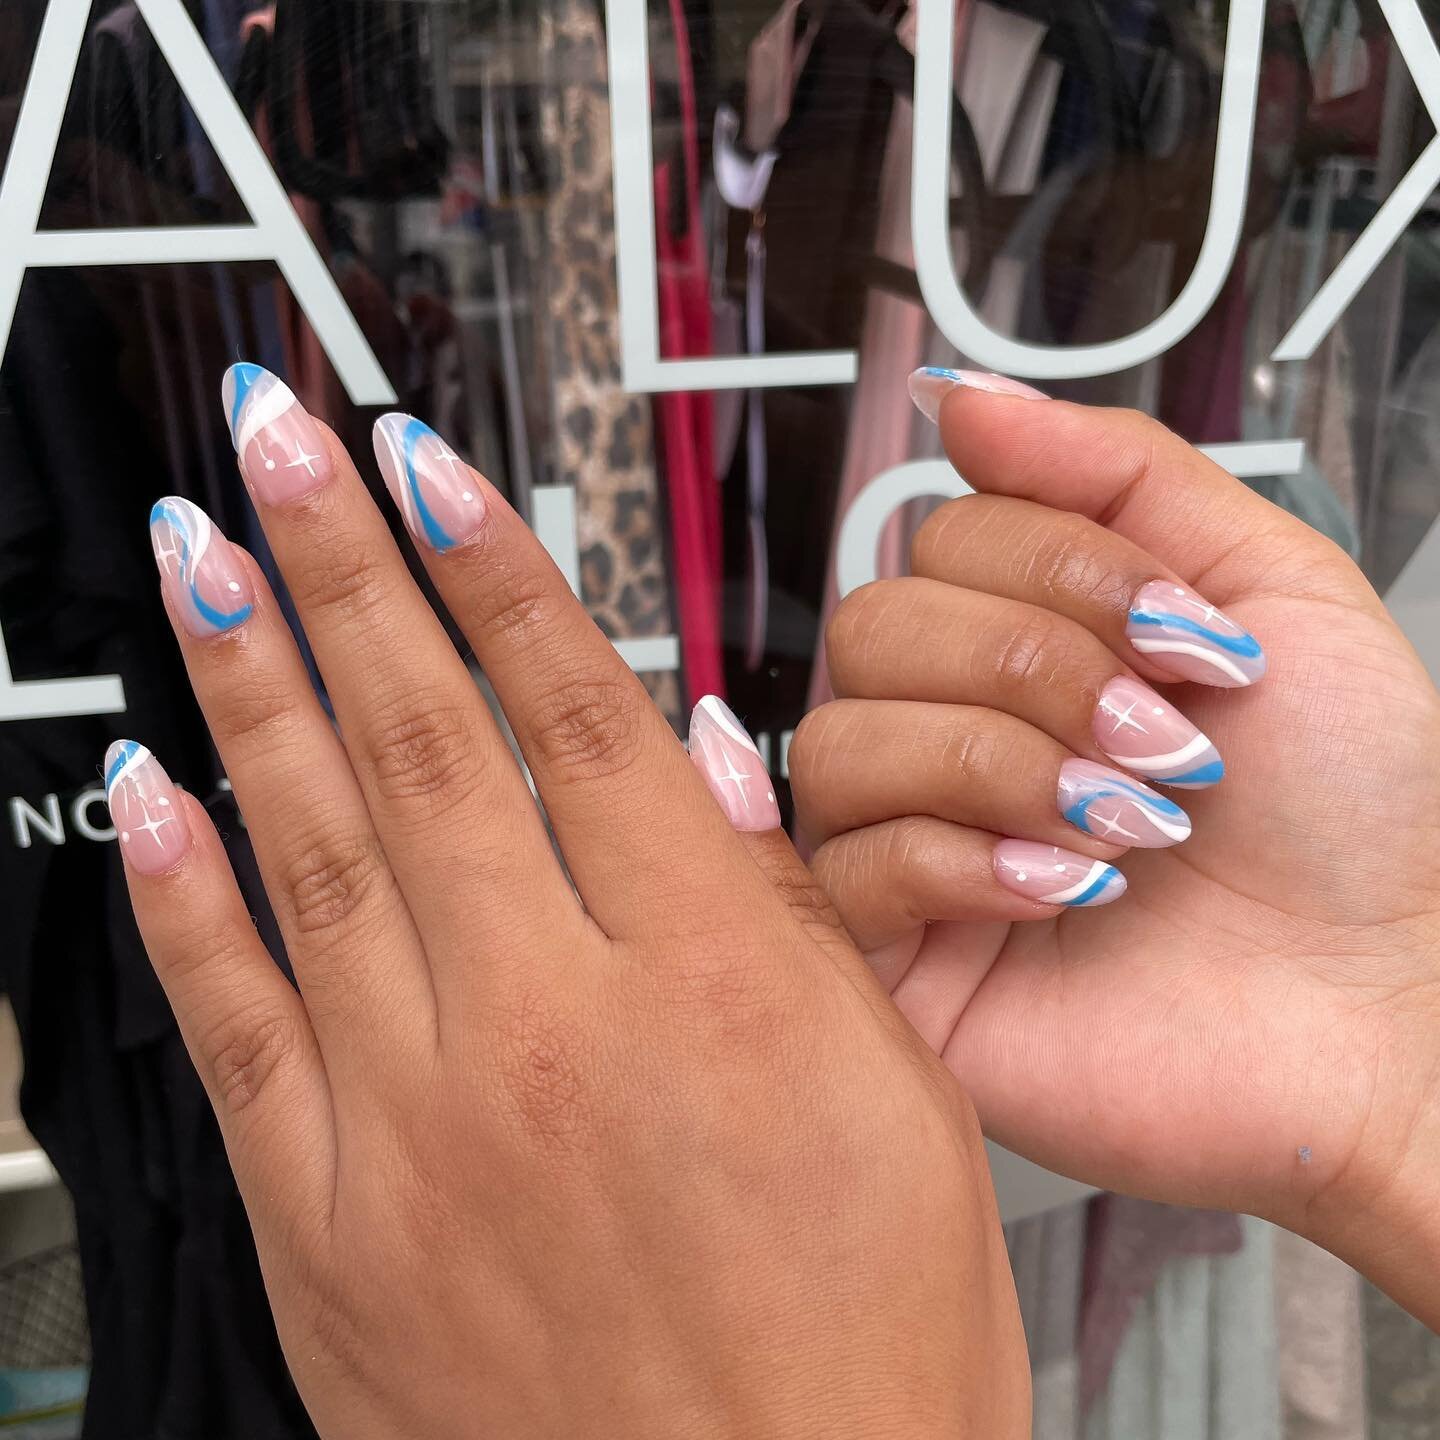 Gel-X nail tips and Extend gel are manufactured from cutting edge soft gel formulas for convenient soak-off capabilities. No filing needed, no dust, no odor, and no damage to natural nails! Try Gel-X as an alternative option to traditional acrylic or